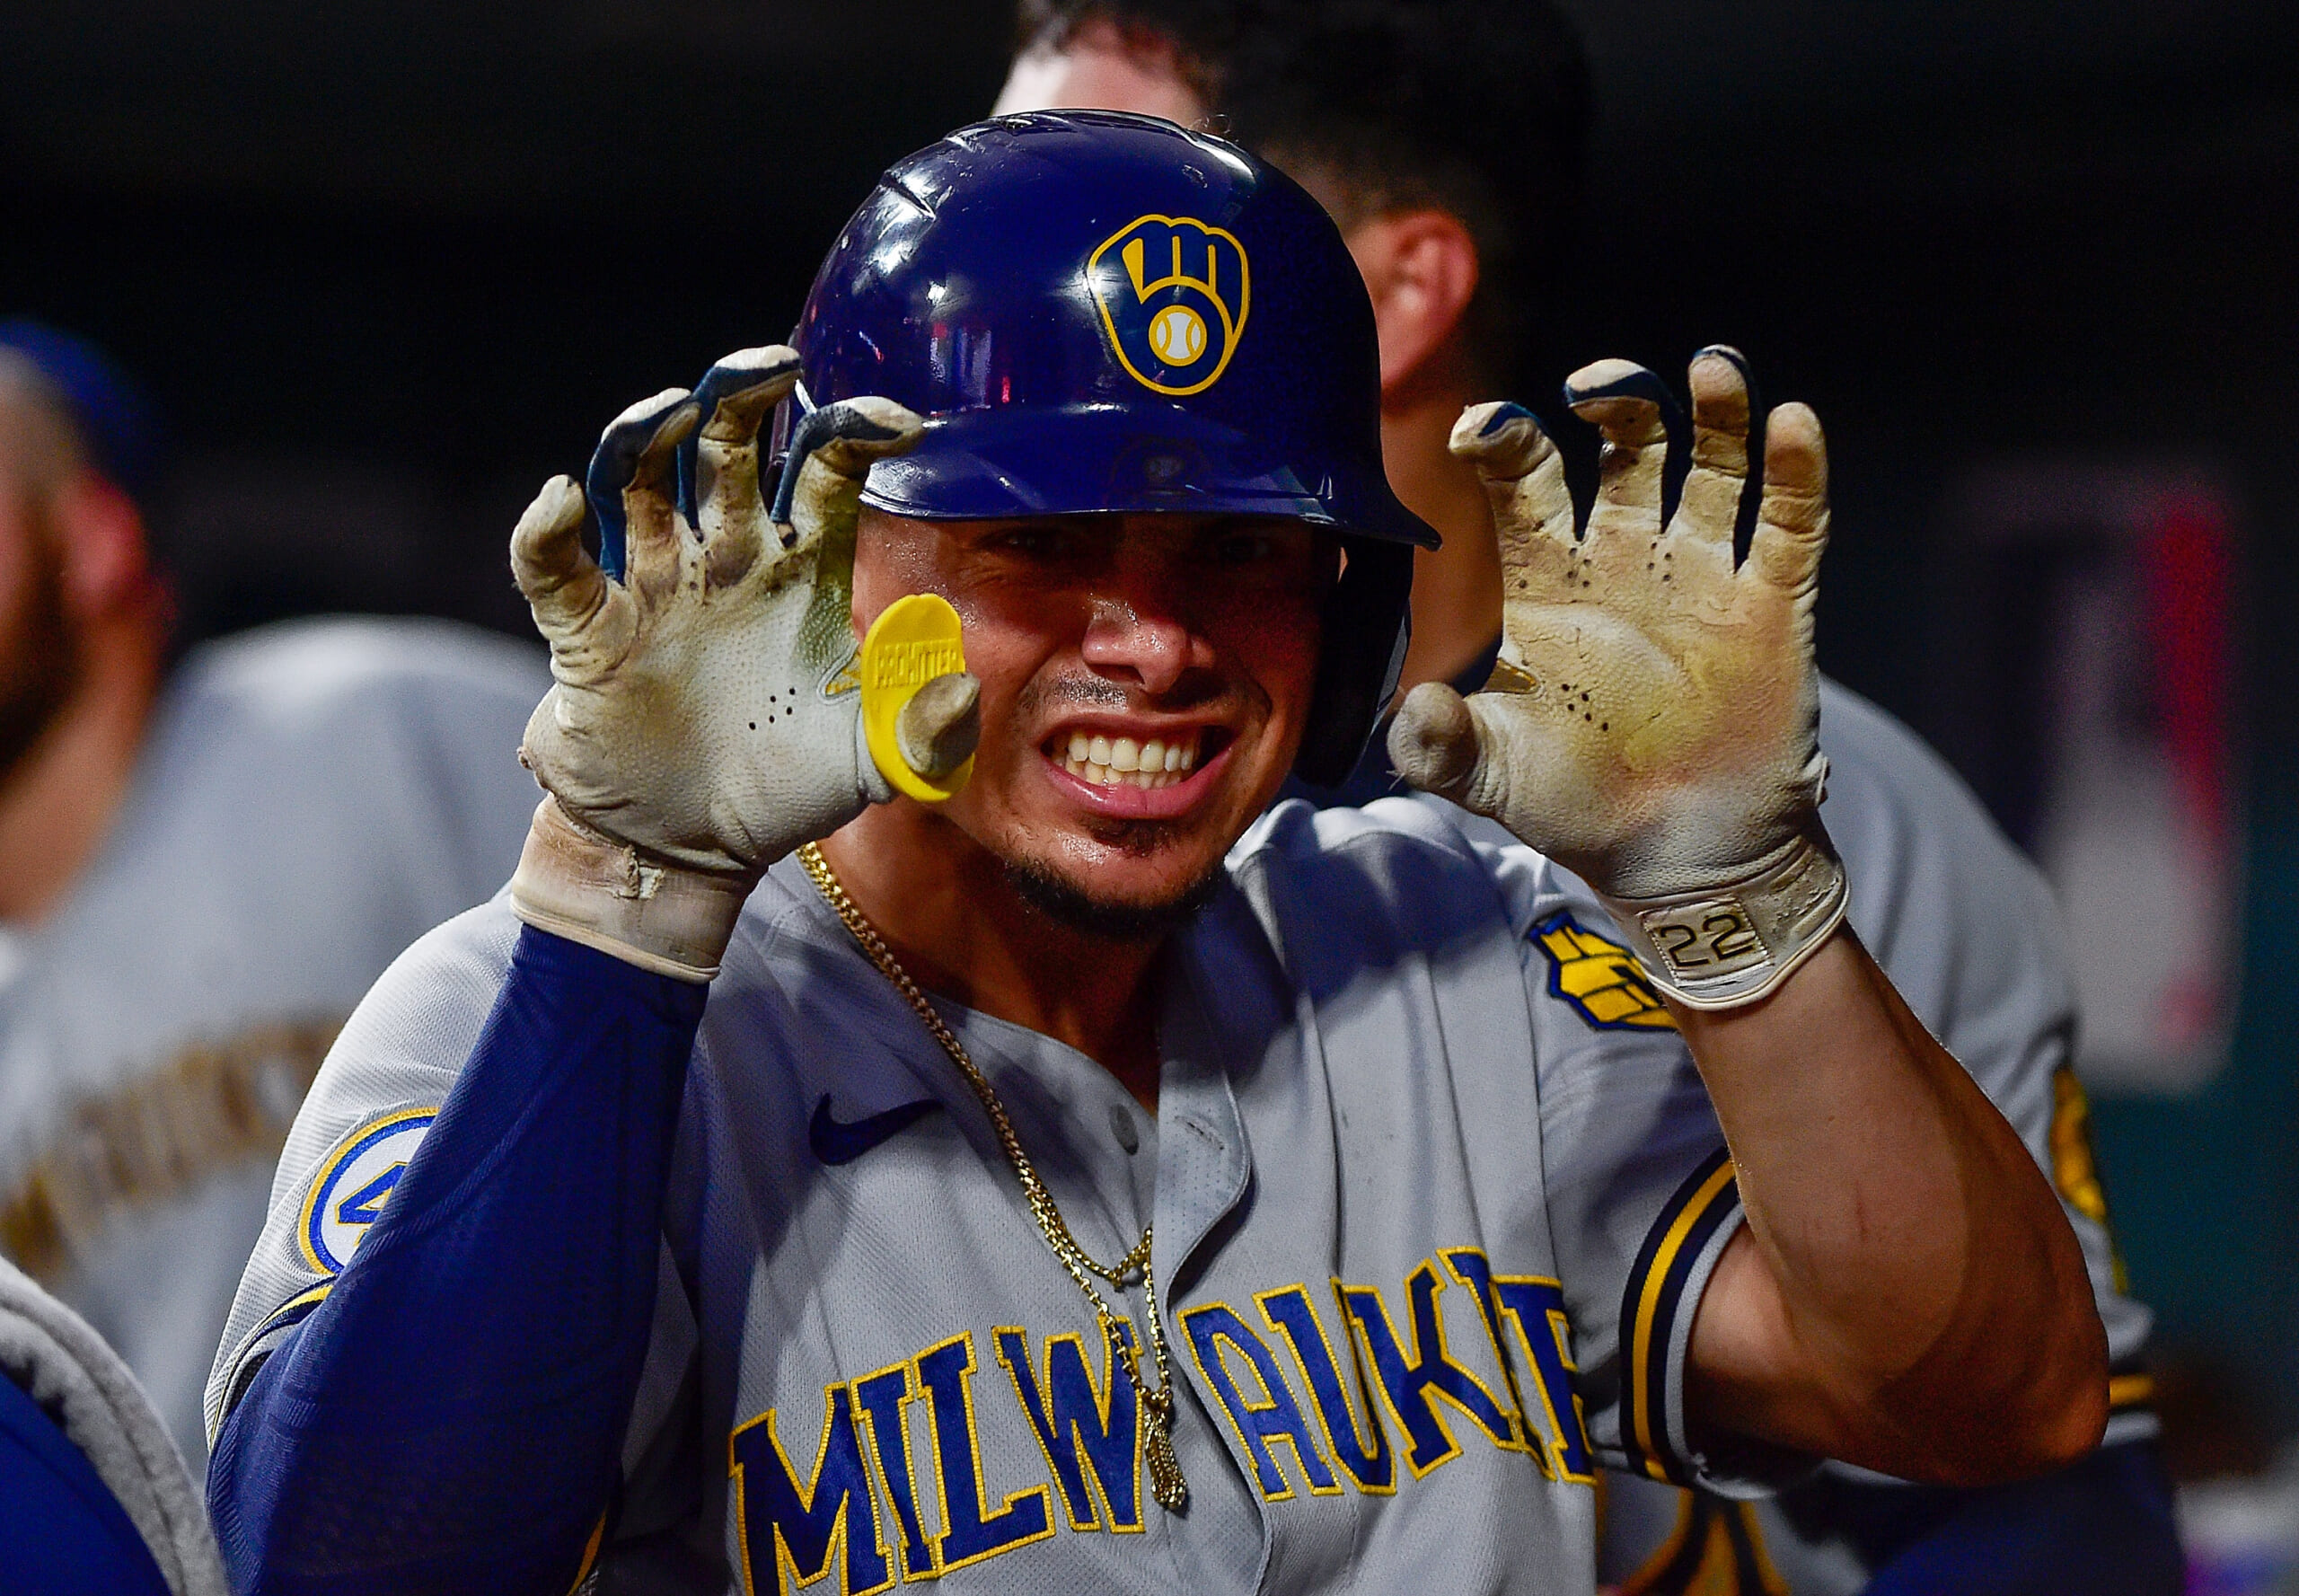 Willy Adames has rediscovered his bat with Brewers